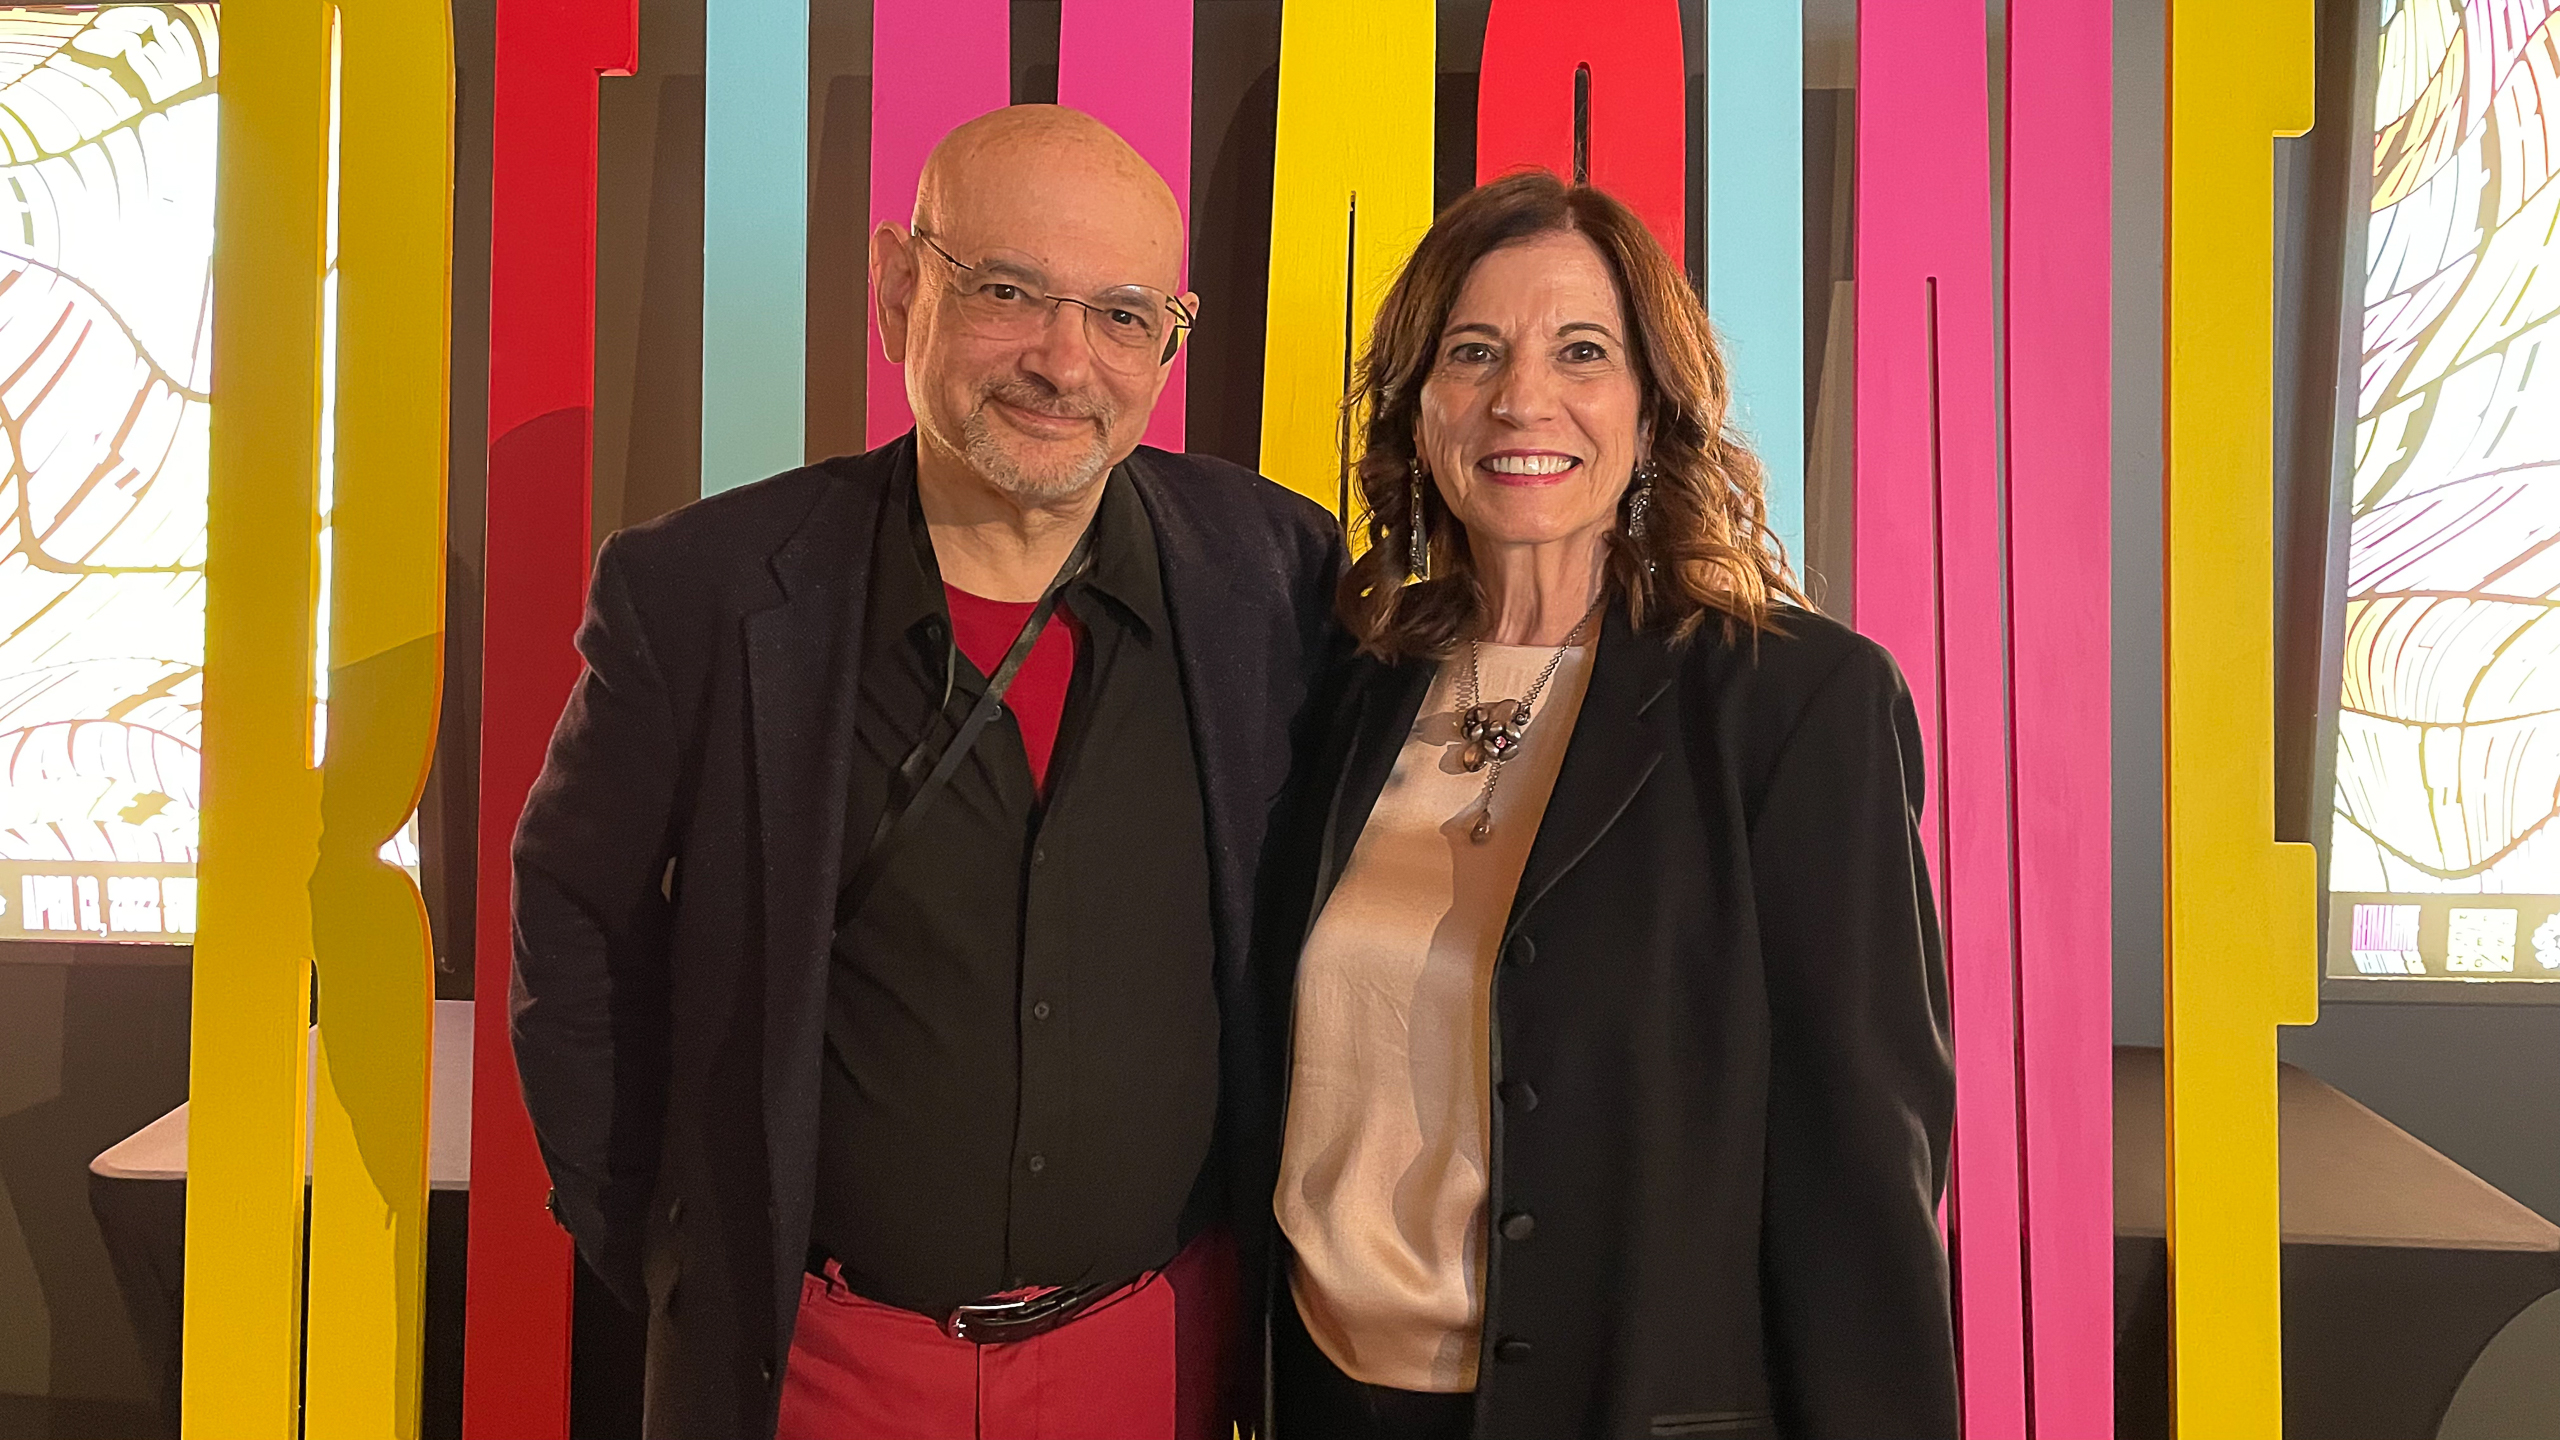 Steven Heller and Lita Talarico in front of sign